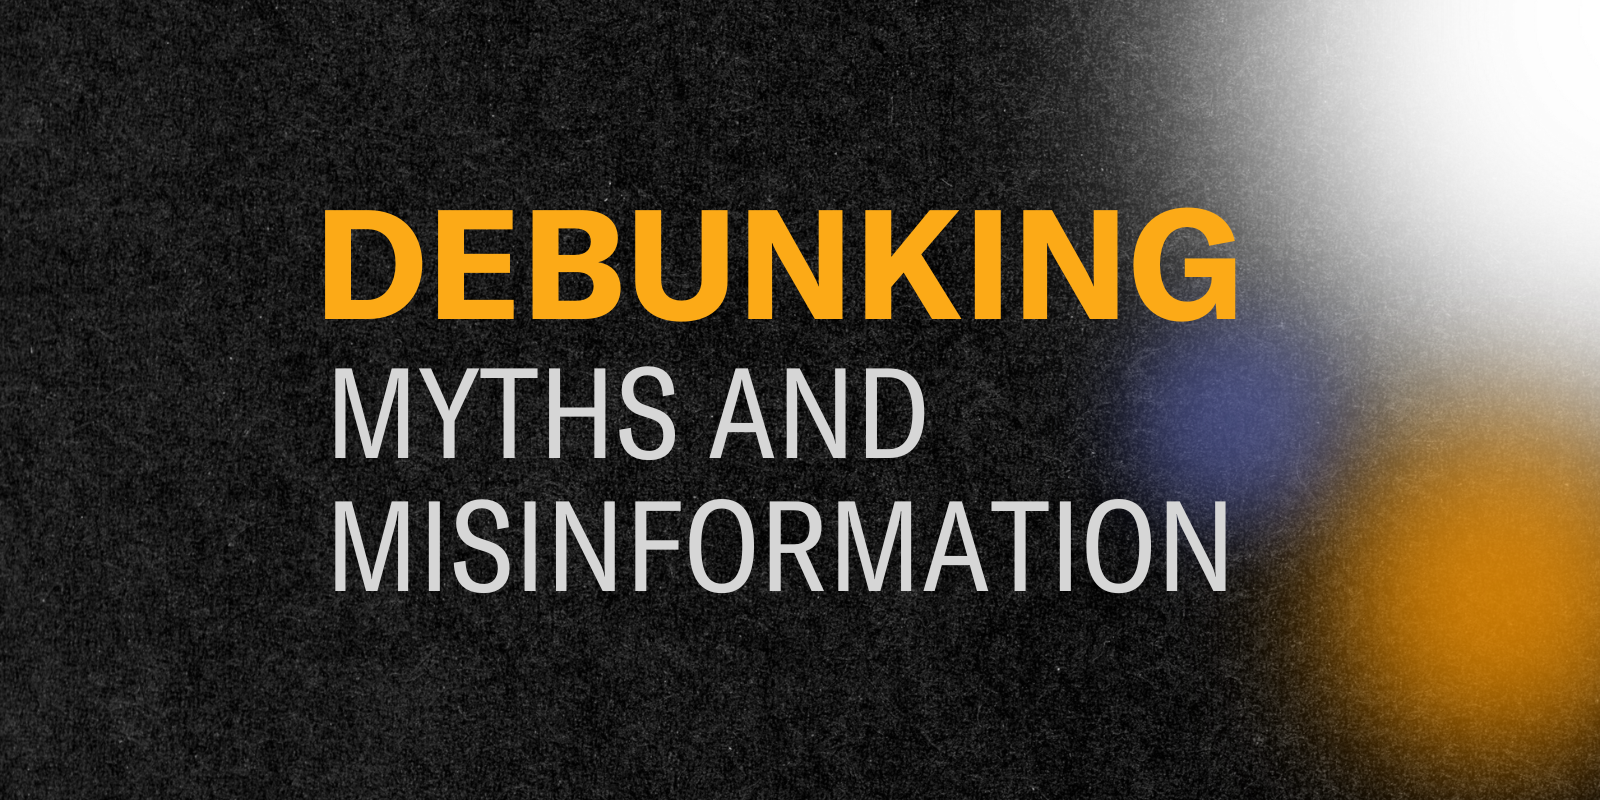 Debunking myths and misinformation 